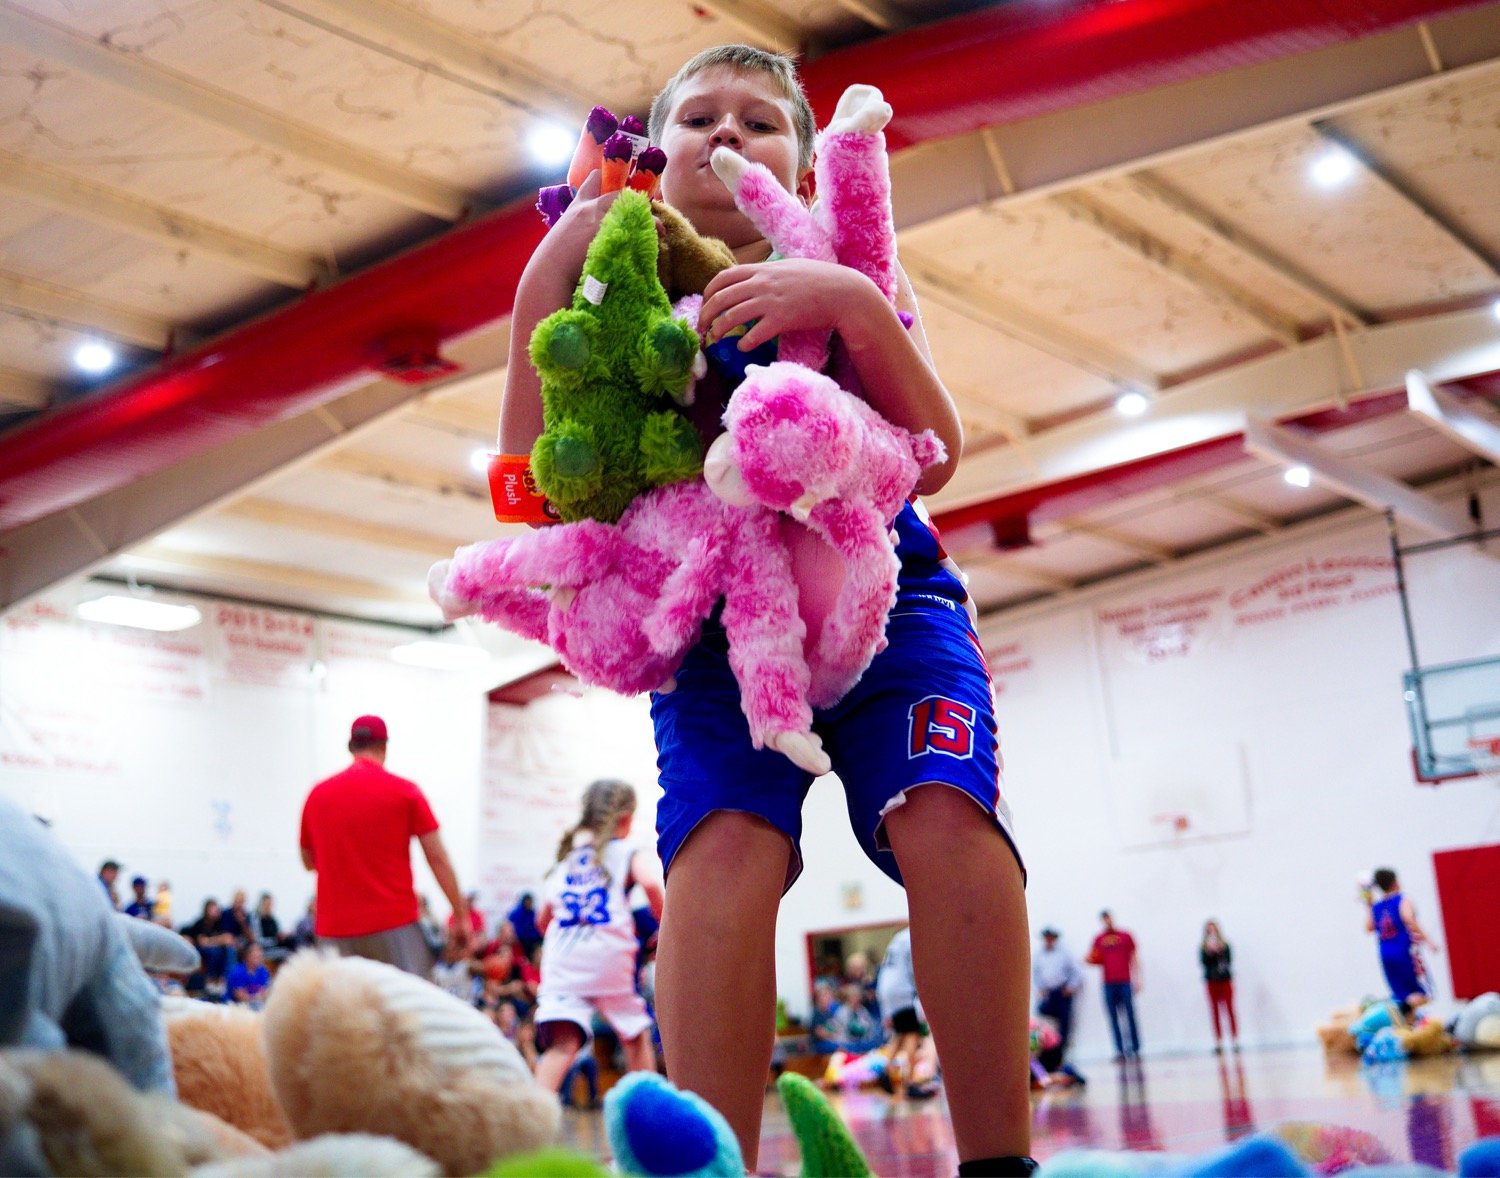 Hogan Webster helps gather stuffed animals following the girls game. Those attending could donate a stuffed toy in lieu of admission, to be donated to Toys for Tots by the Alba-Golden Youth Foundation.